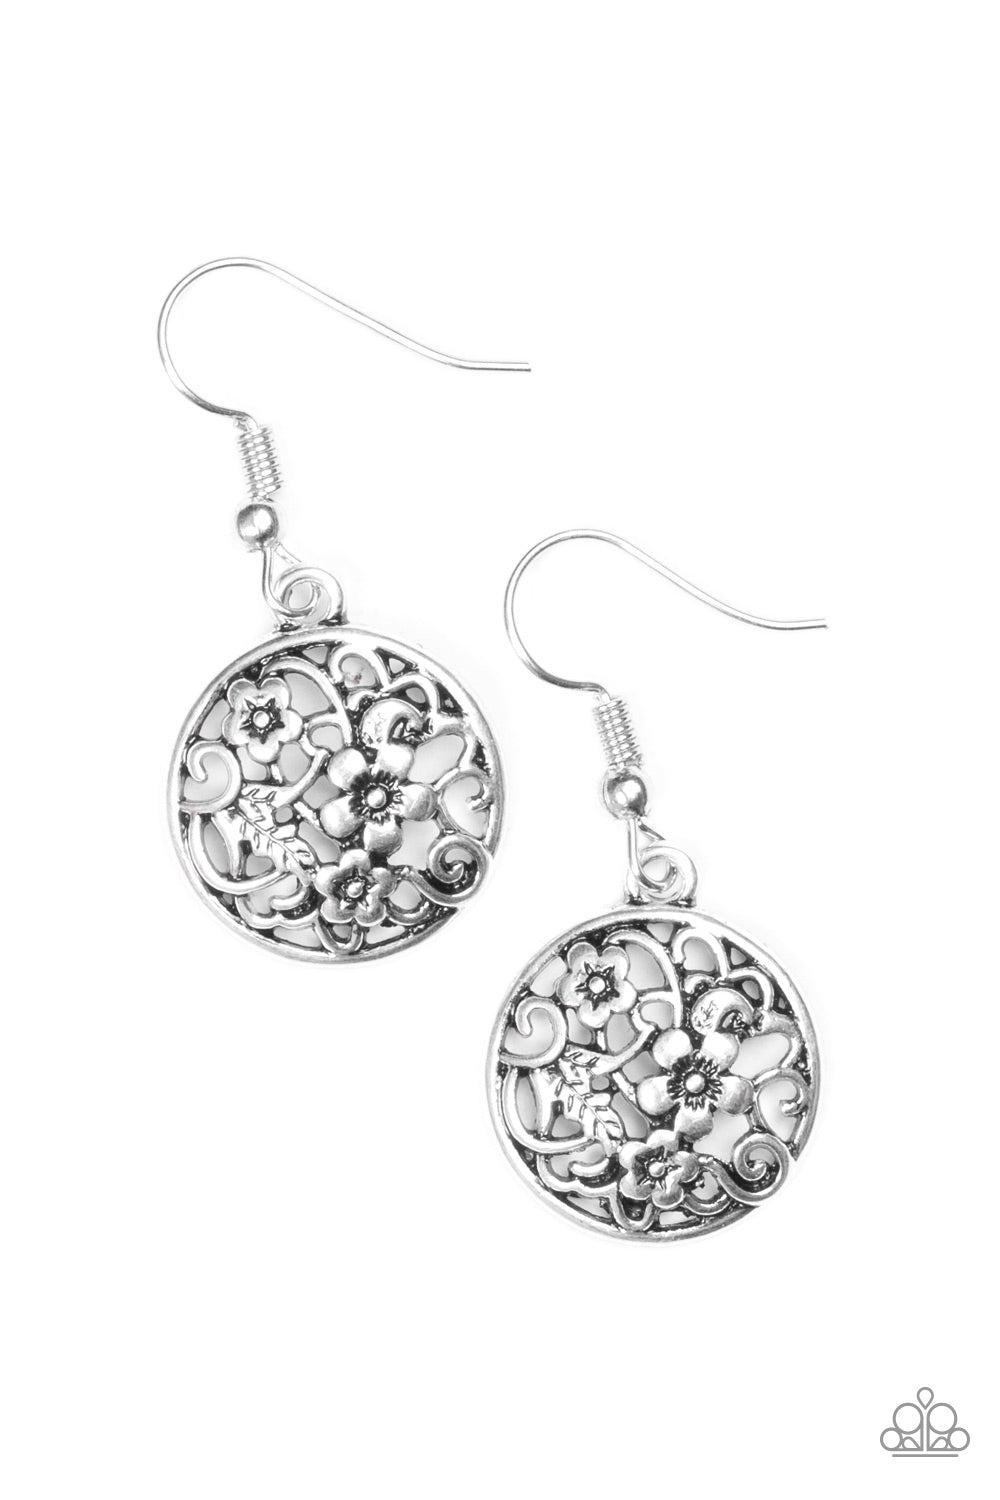 Paparazzi Accessories Flower Patch Perfection - Silver Earrings 